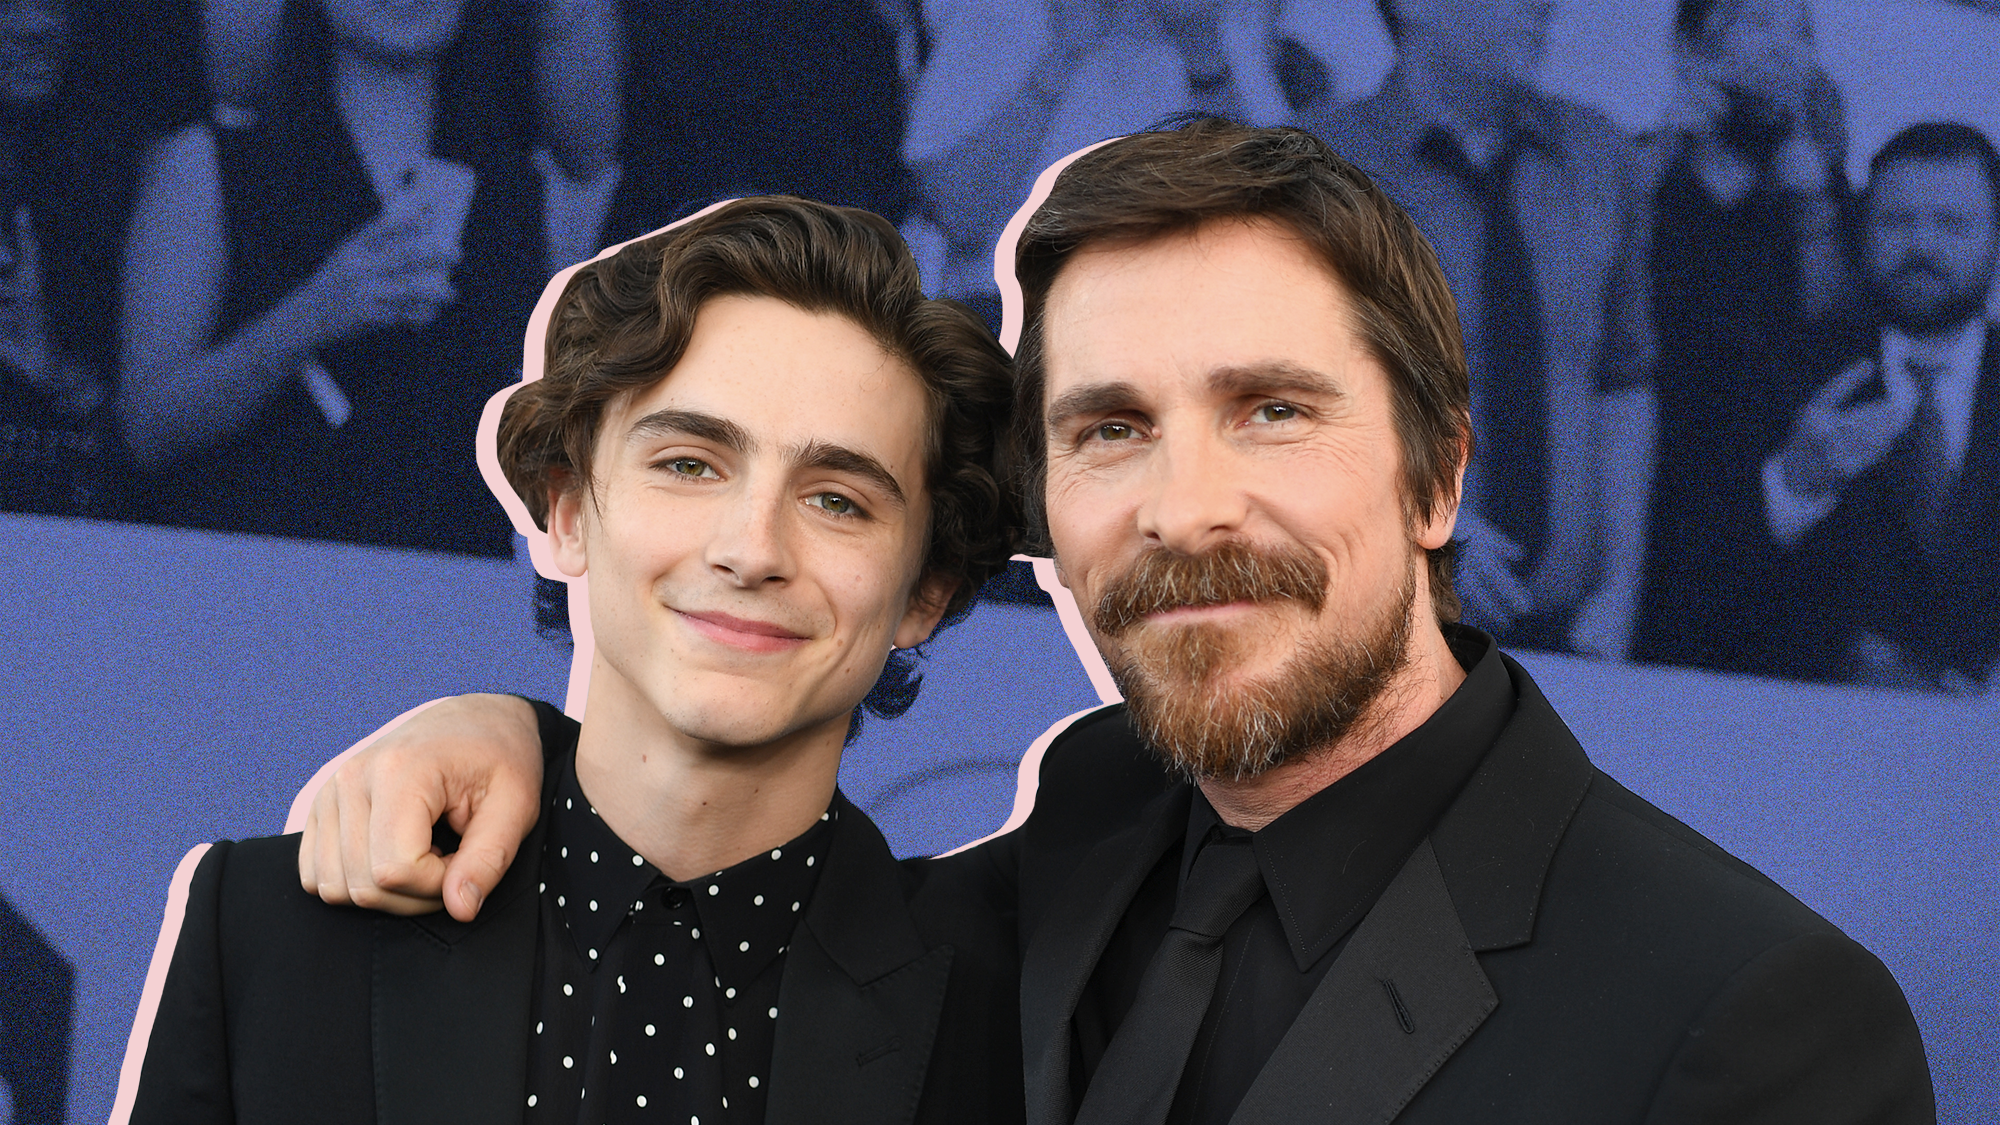 It Was All About What Timmy Chalamet Didn't Wear (A Shirt!) on the